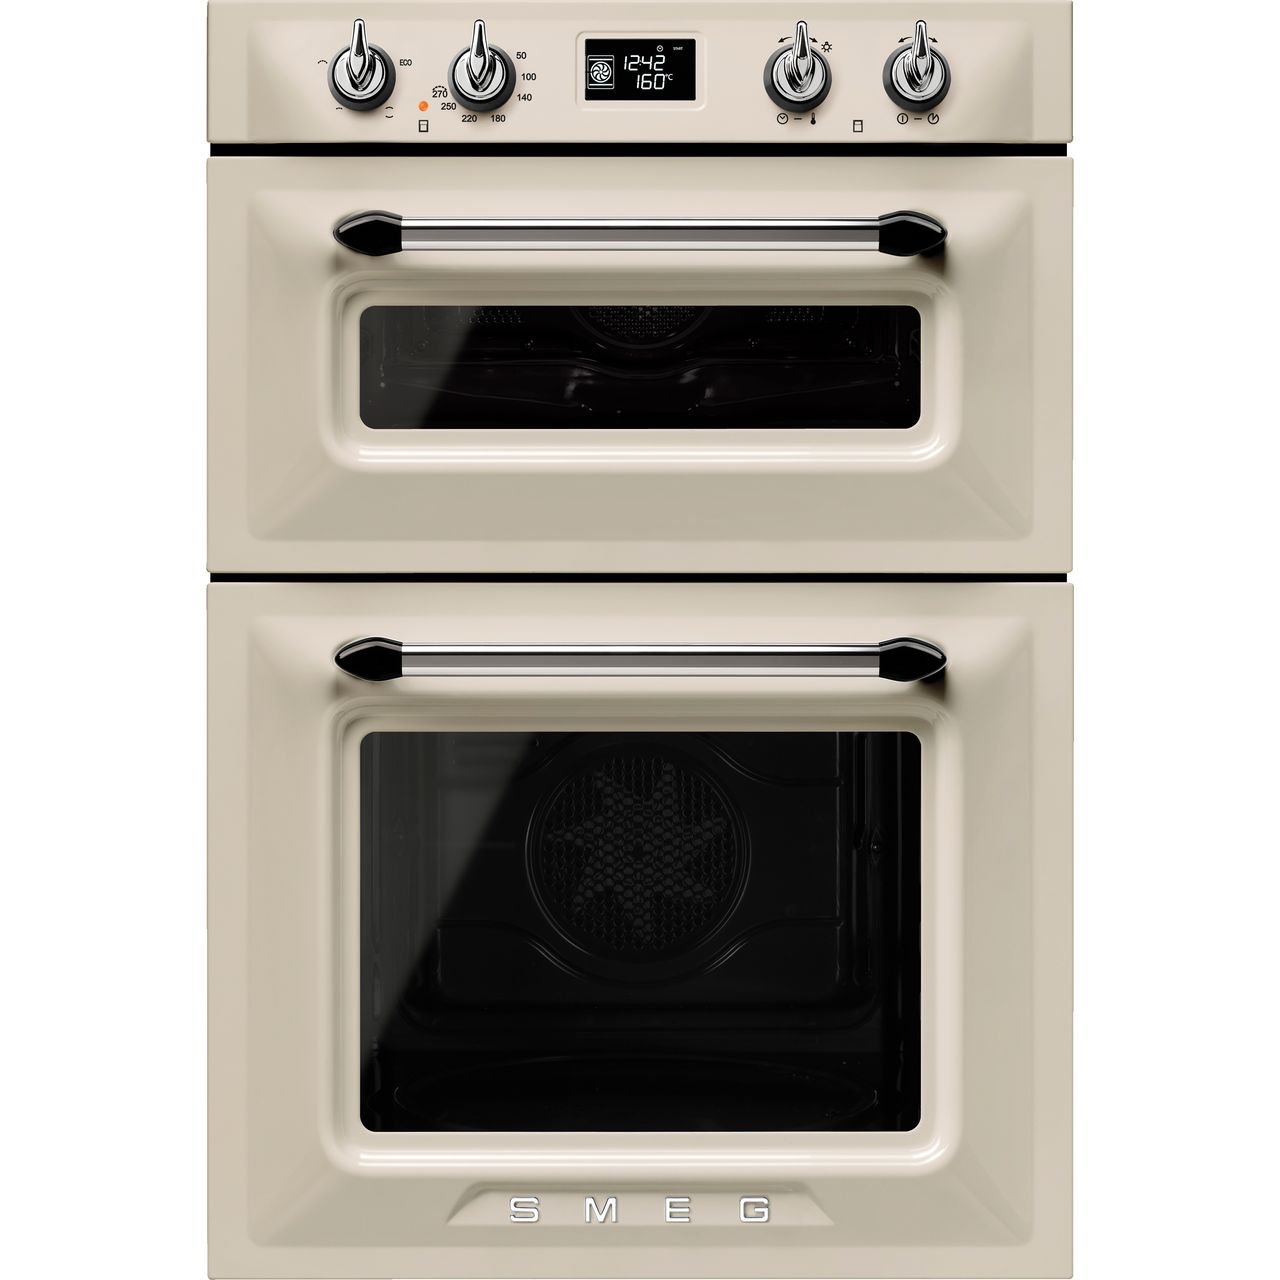 Smeg Victoria DOSF6920P1 Built In Double Oven Review